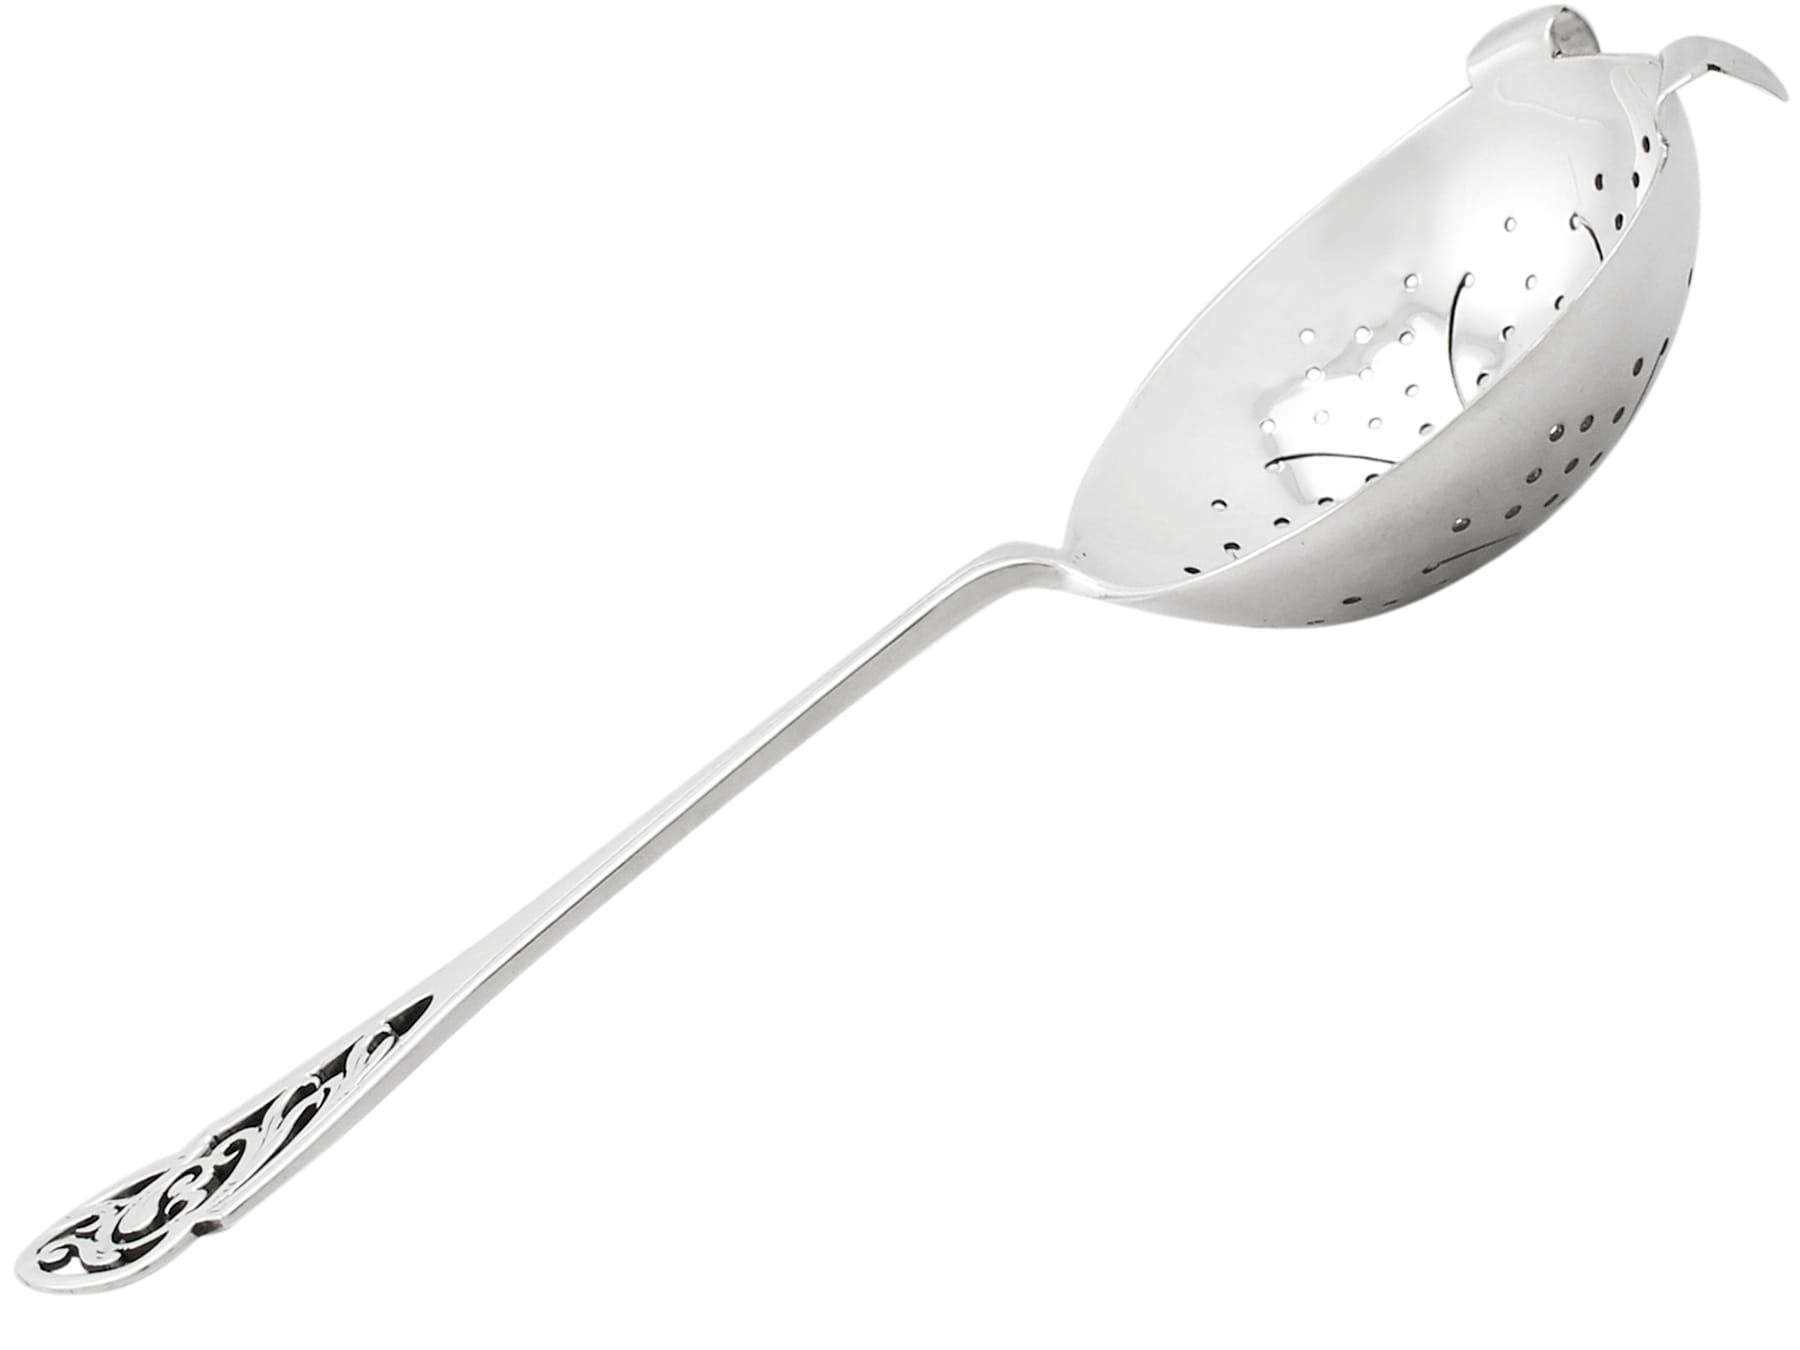 A fine and impressive vintage George VI English sterling silver tea strainer; an addition to our silver teaware collection

This fine vintage sterling silver tea strainer has a circular rounded form.

The bowl of the tea strainer is embellished with